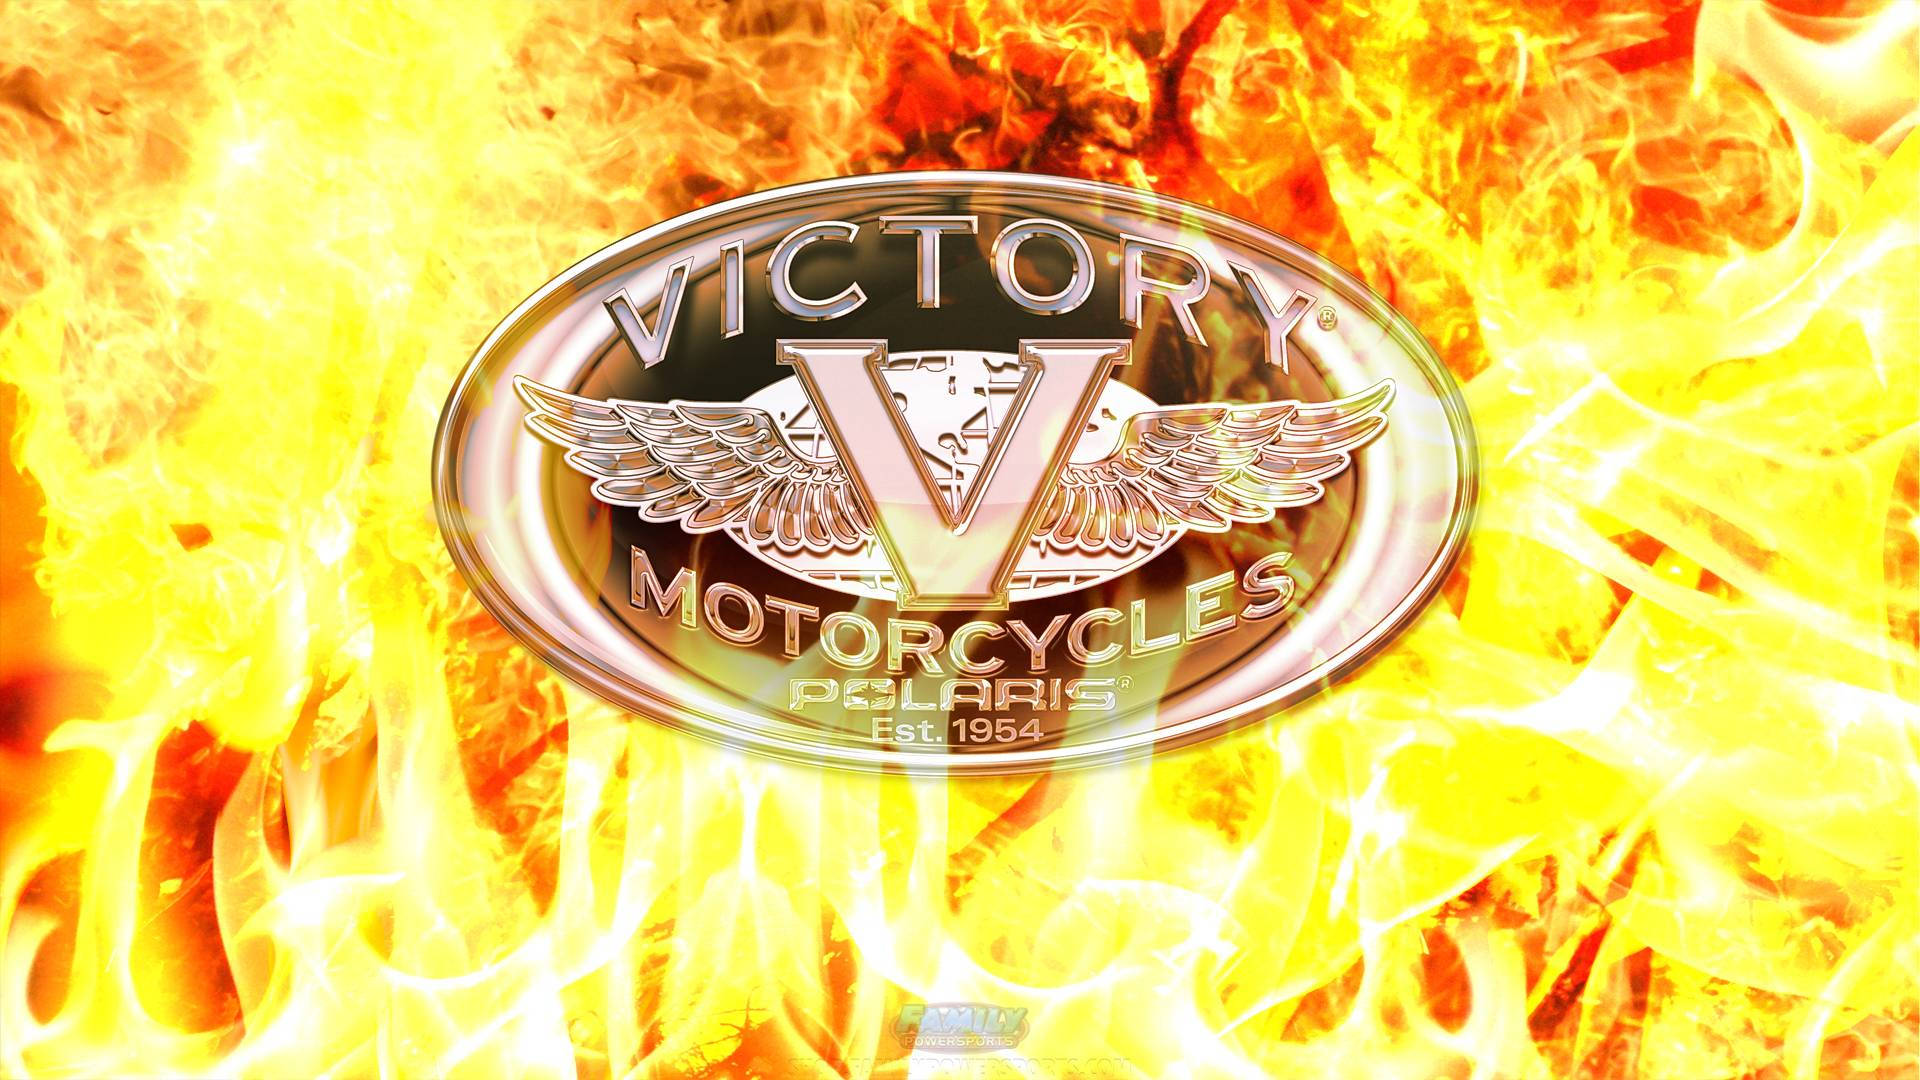 Fiery Victory Motorcycle